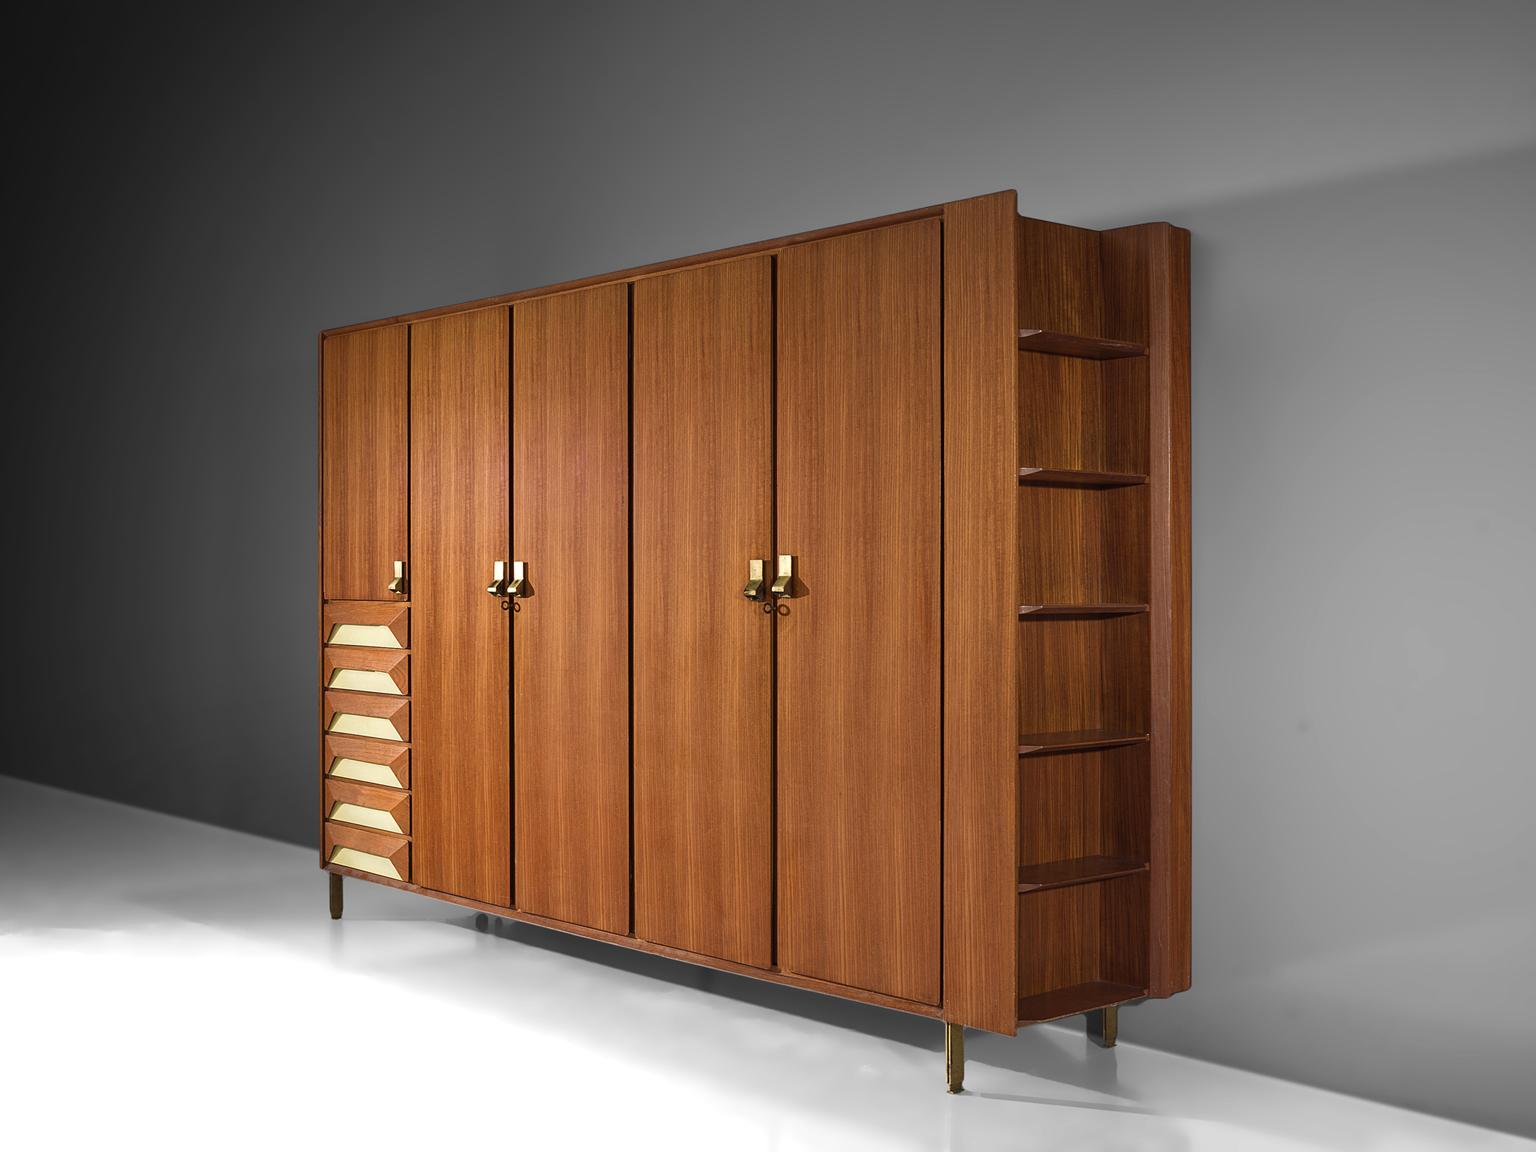 Cabinet, teak, brass, Italy, 1950s.

This grand cabinet is executed in teak with brass details on handles and legs. The cabinet features a compartment with six drawers. Each of the drawers have a an off-white background by means of which the